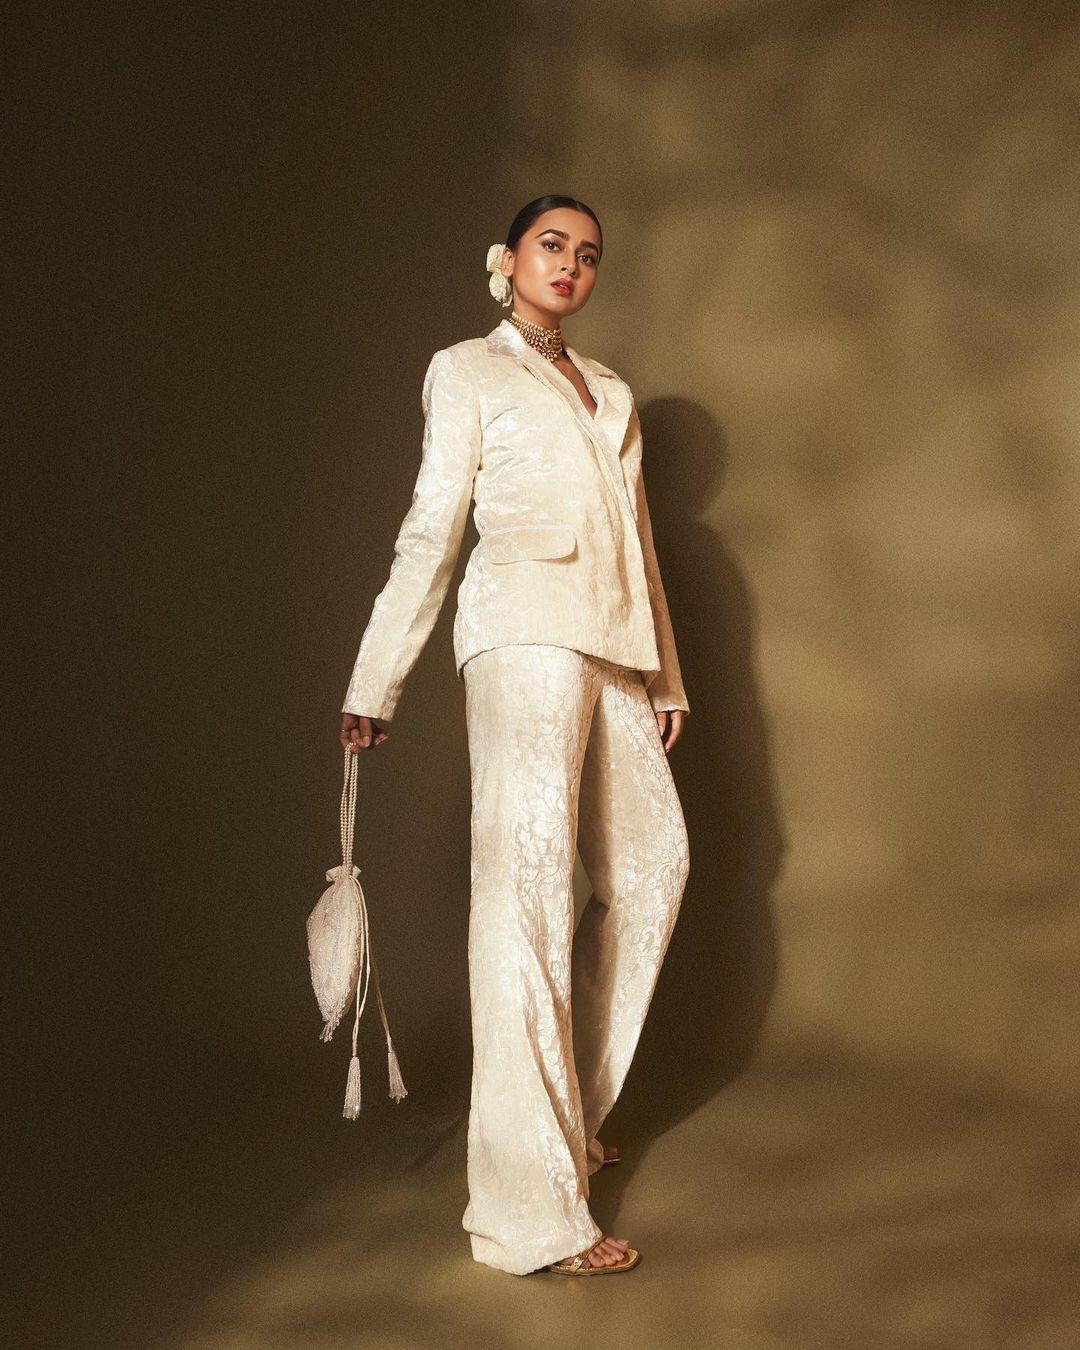 Let's talk about Tejasswi's outfit, and how perfect it is for Promise Day – it's a classy off-white colour. She has her hair tied up in a knot with a side partition and holds a matching off-white handbag. 